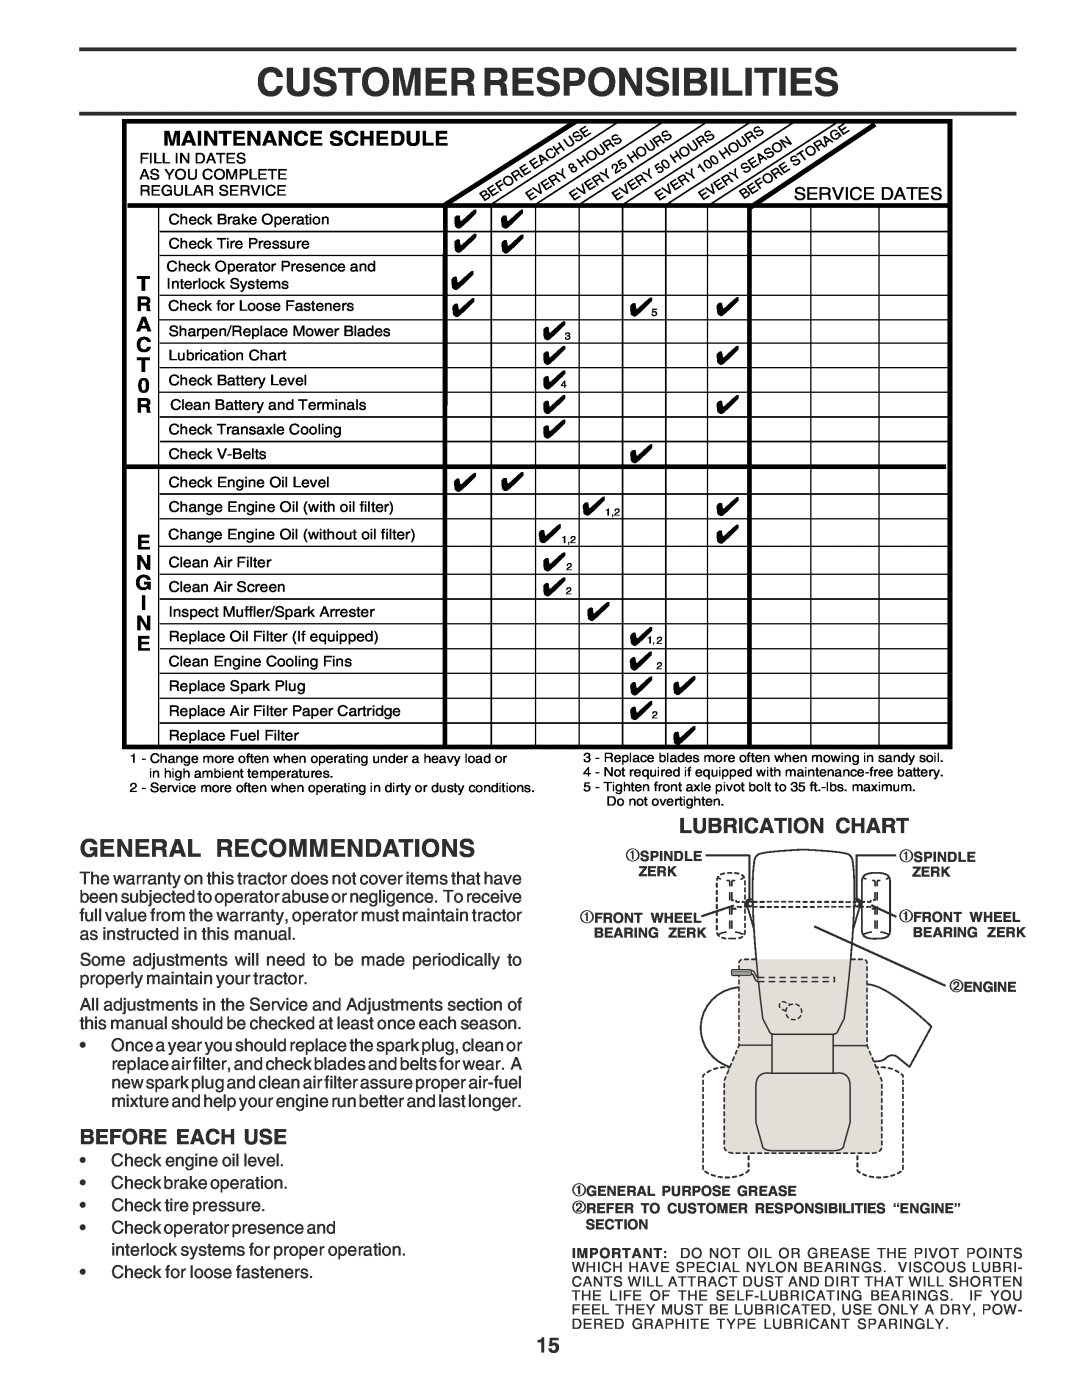 Poulan PR17H42STE owner manual Customer Responsibilities, General Recommendations, Before Each Use, Lubrication Chart 